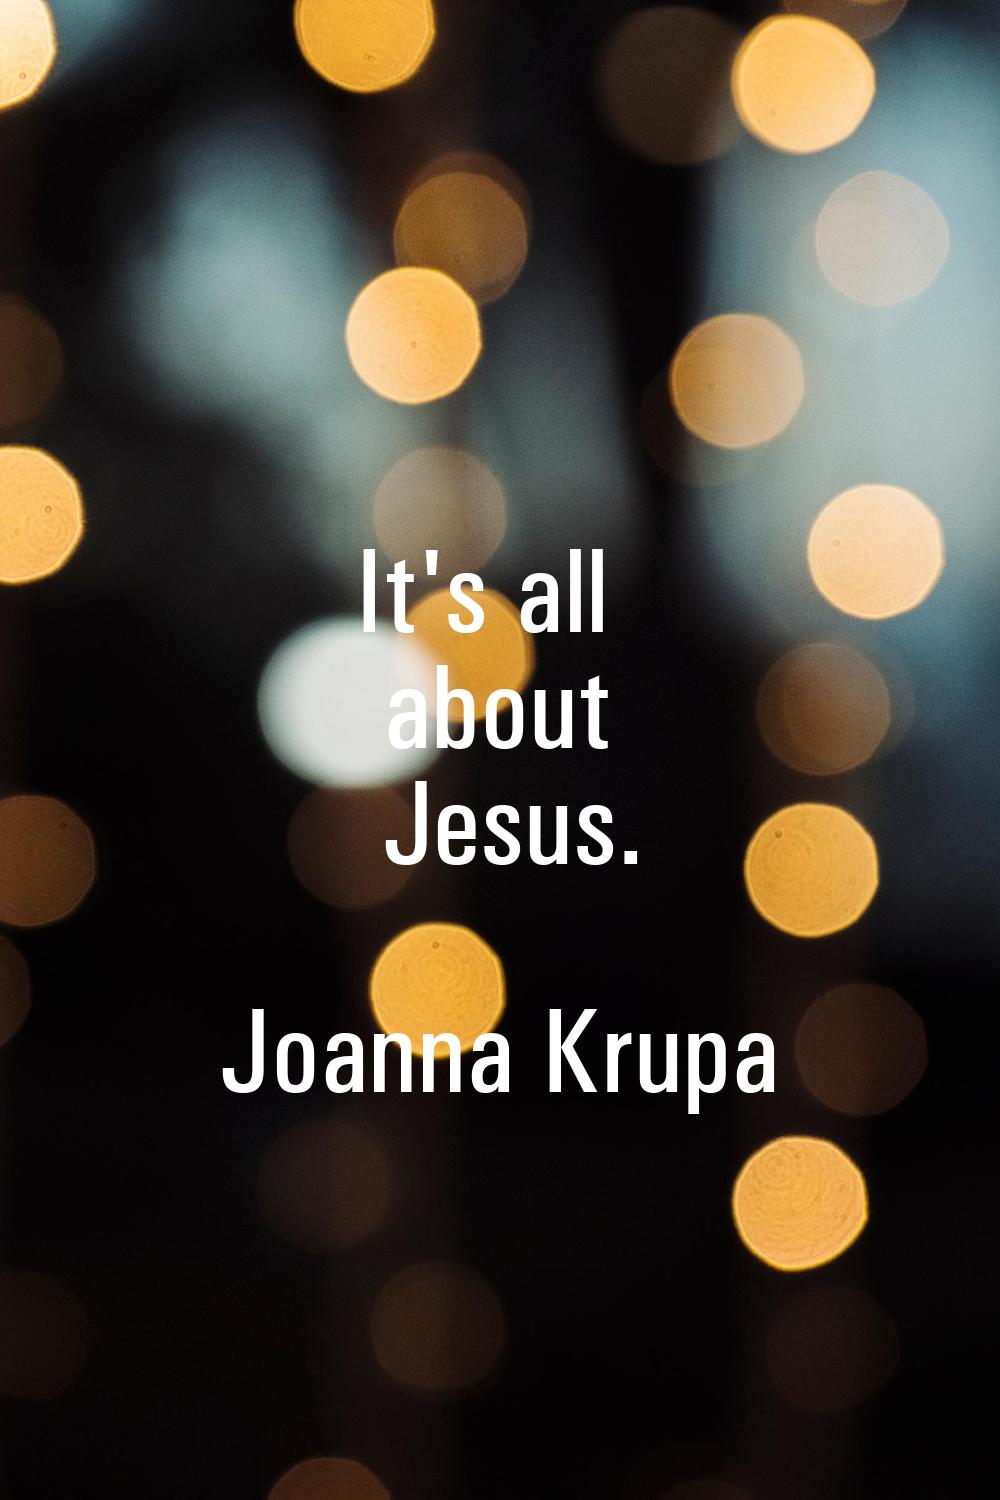 It's all about Jesus.